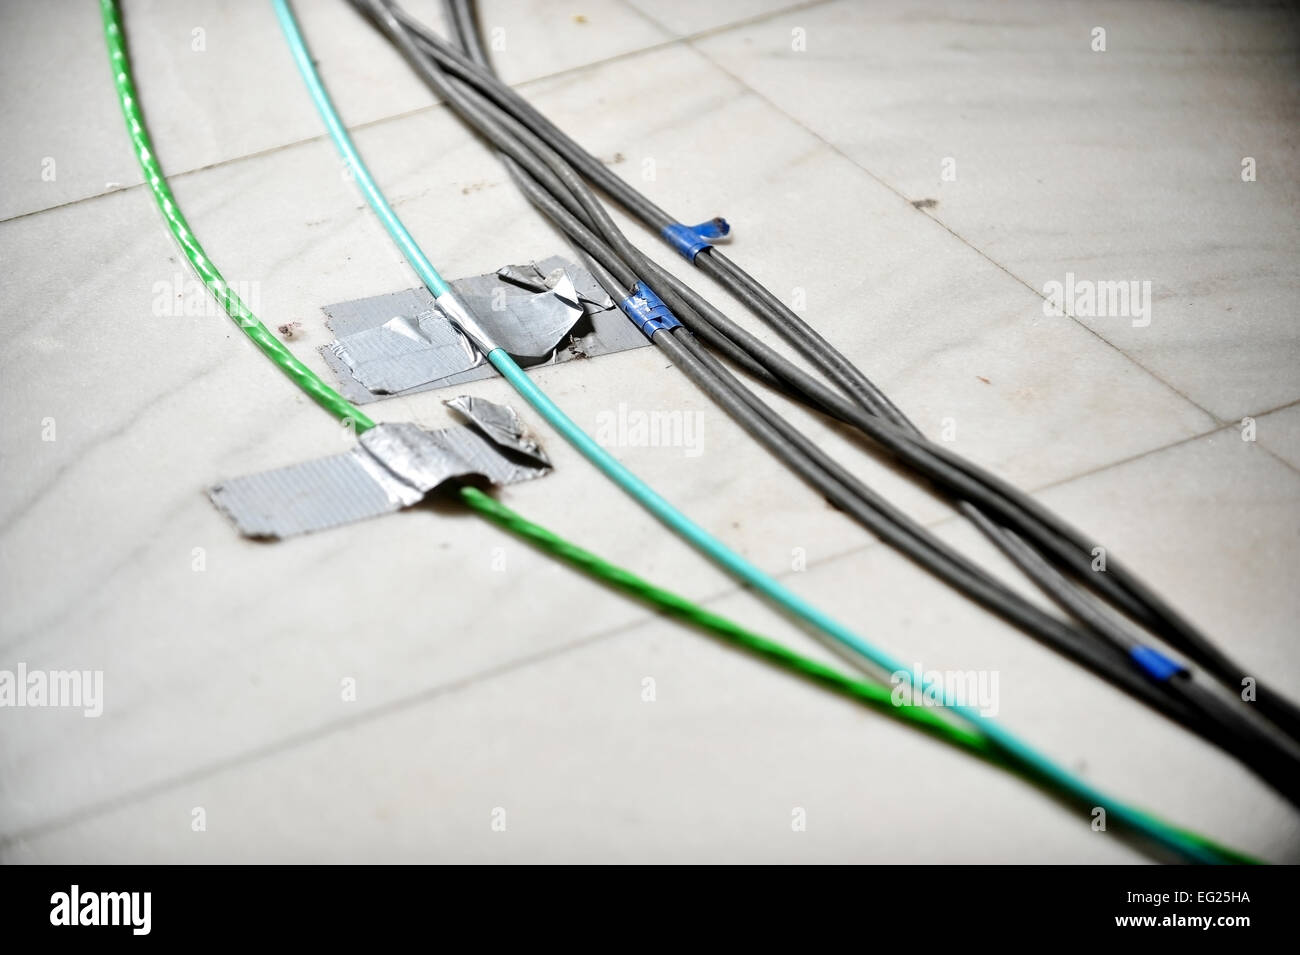 Detail with electric television cables fixed on the floor with duct tape Stock Photo